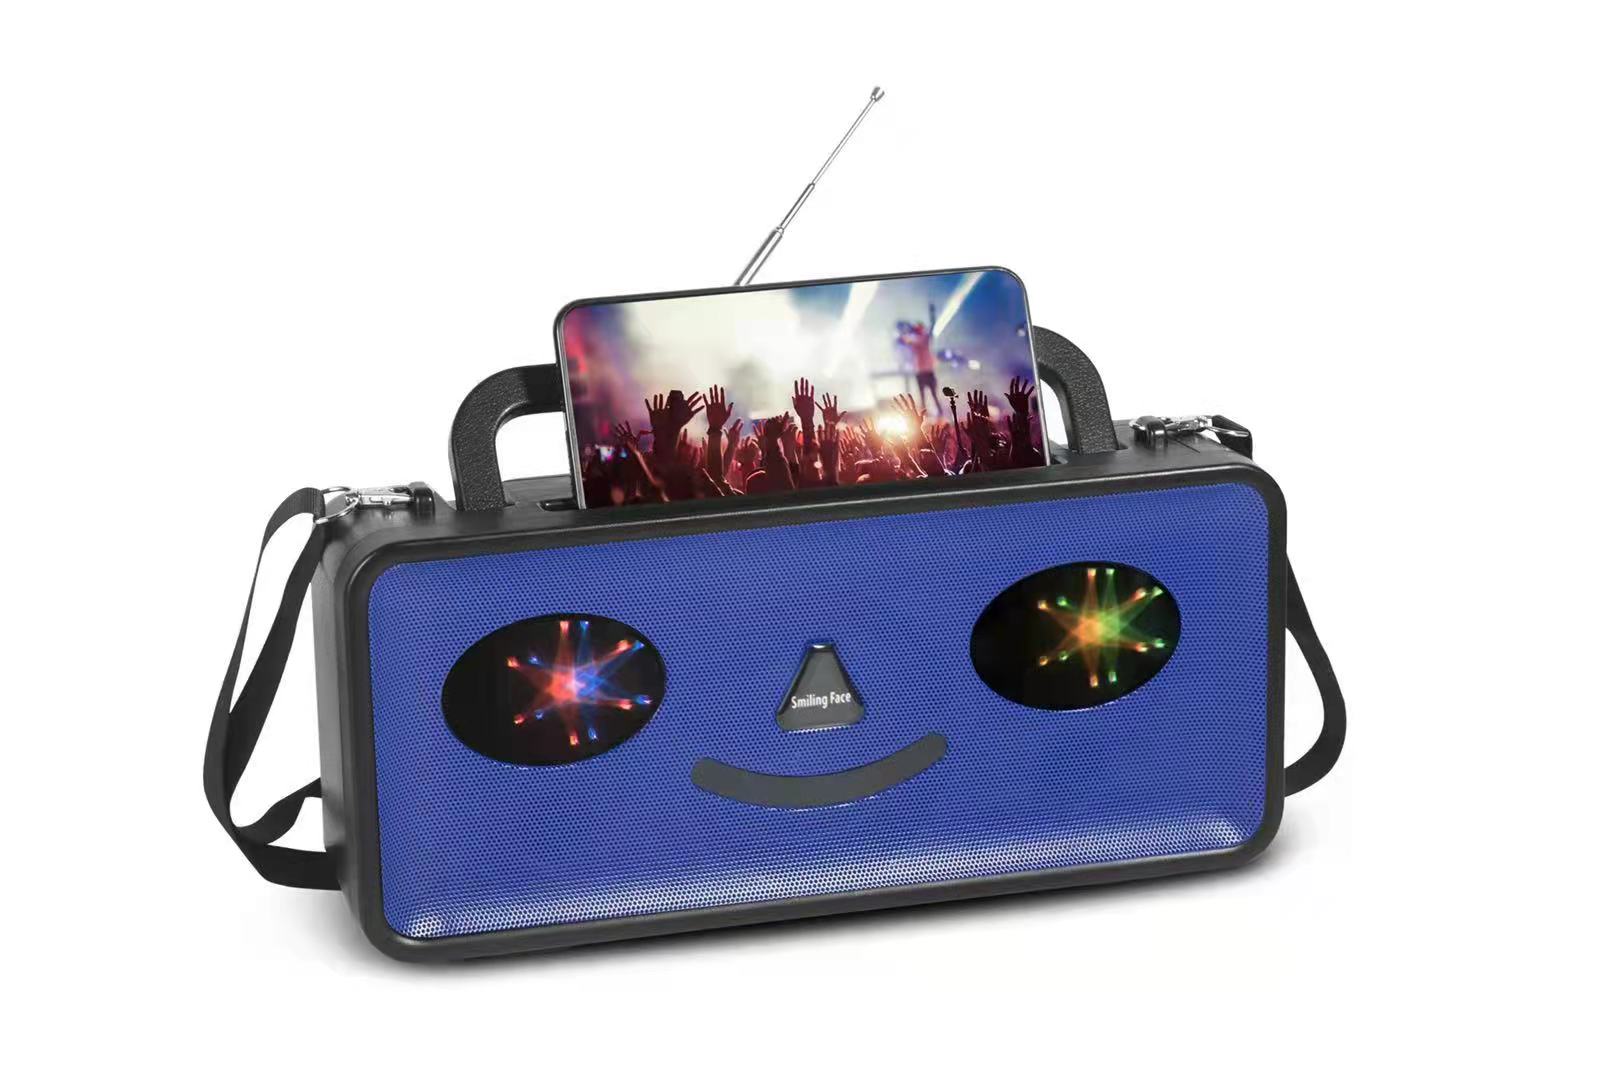 ''Big Smiling Face Design Portable Bluetooth Speaker  for Phone, Device, MUSIC, USB (Blue)''